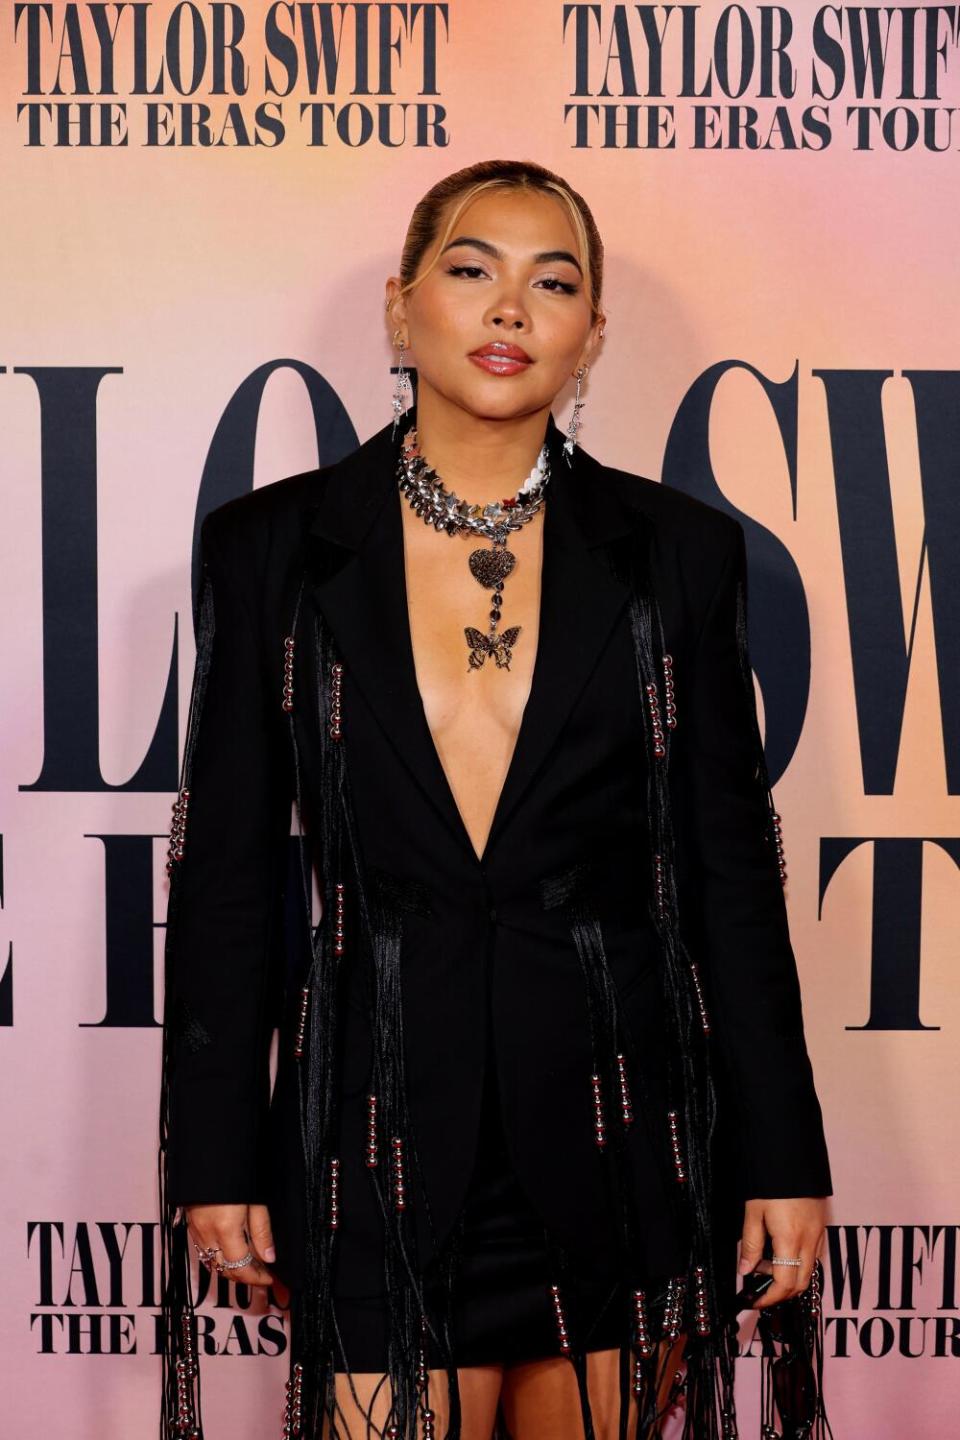 Hayley Kiyoko stands with hair slicked back in a black skirt and jacket with a necklace and no shirt